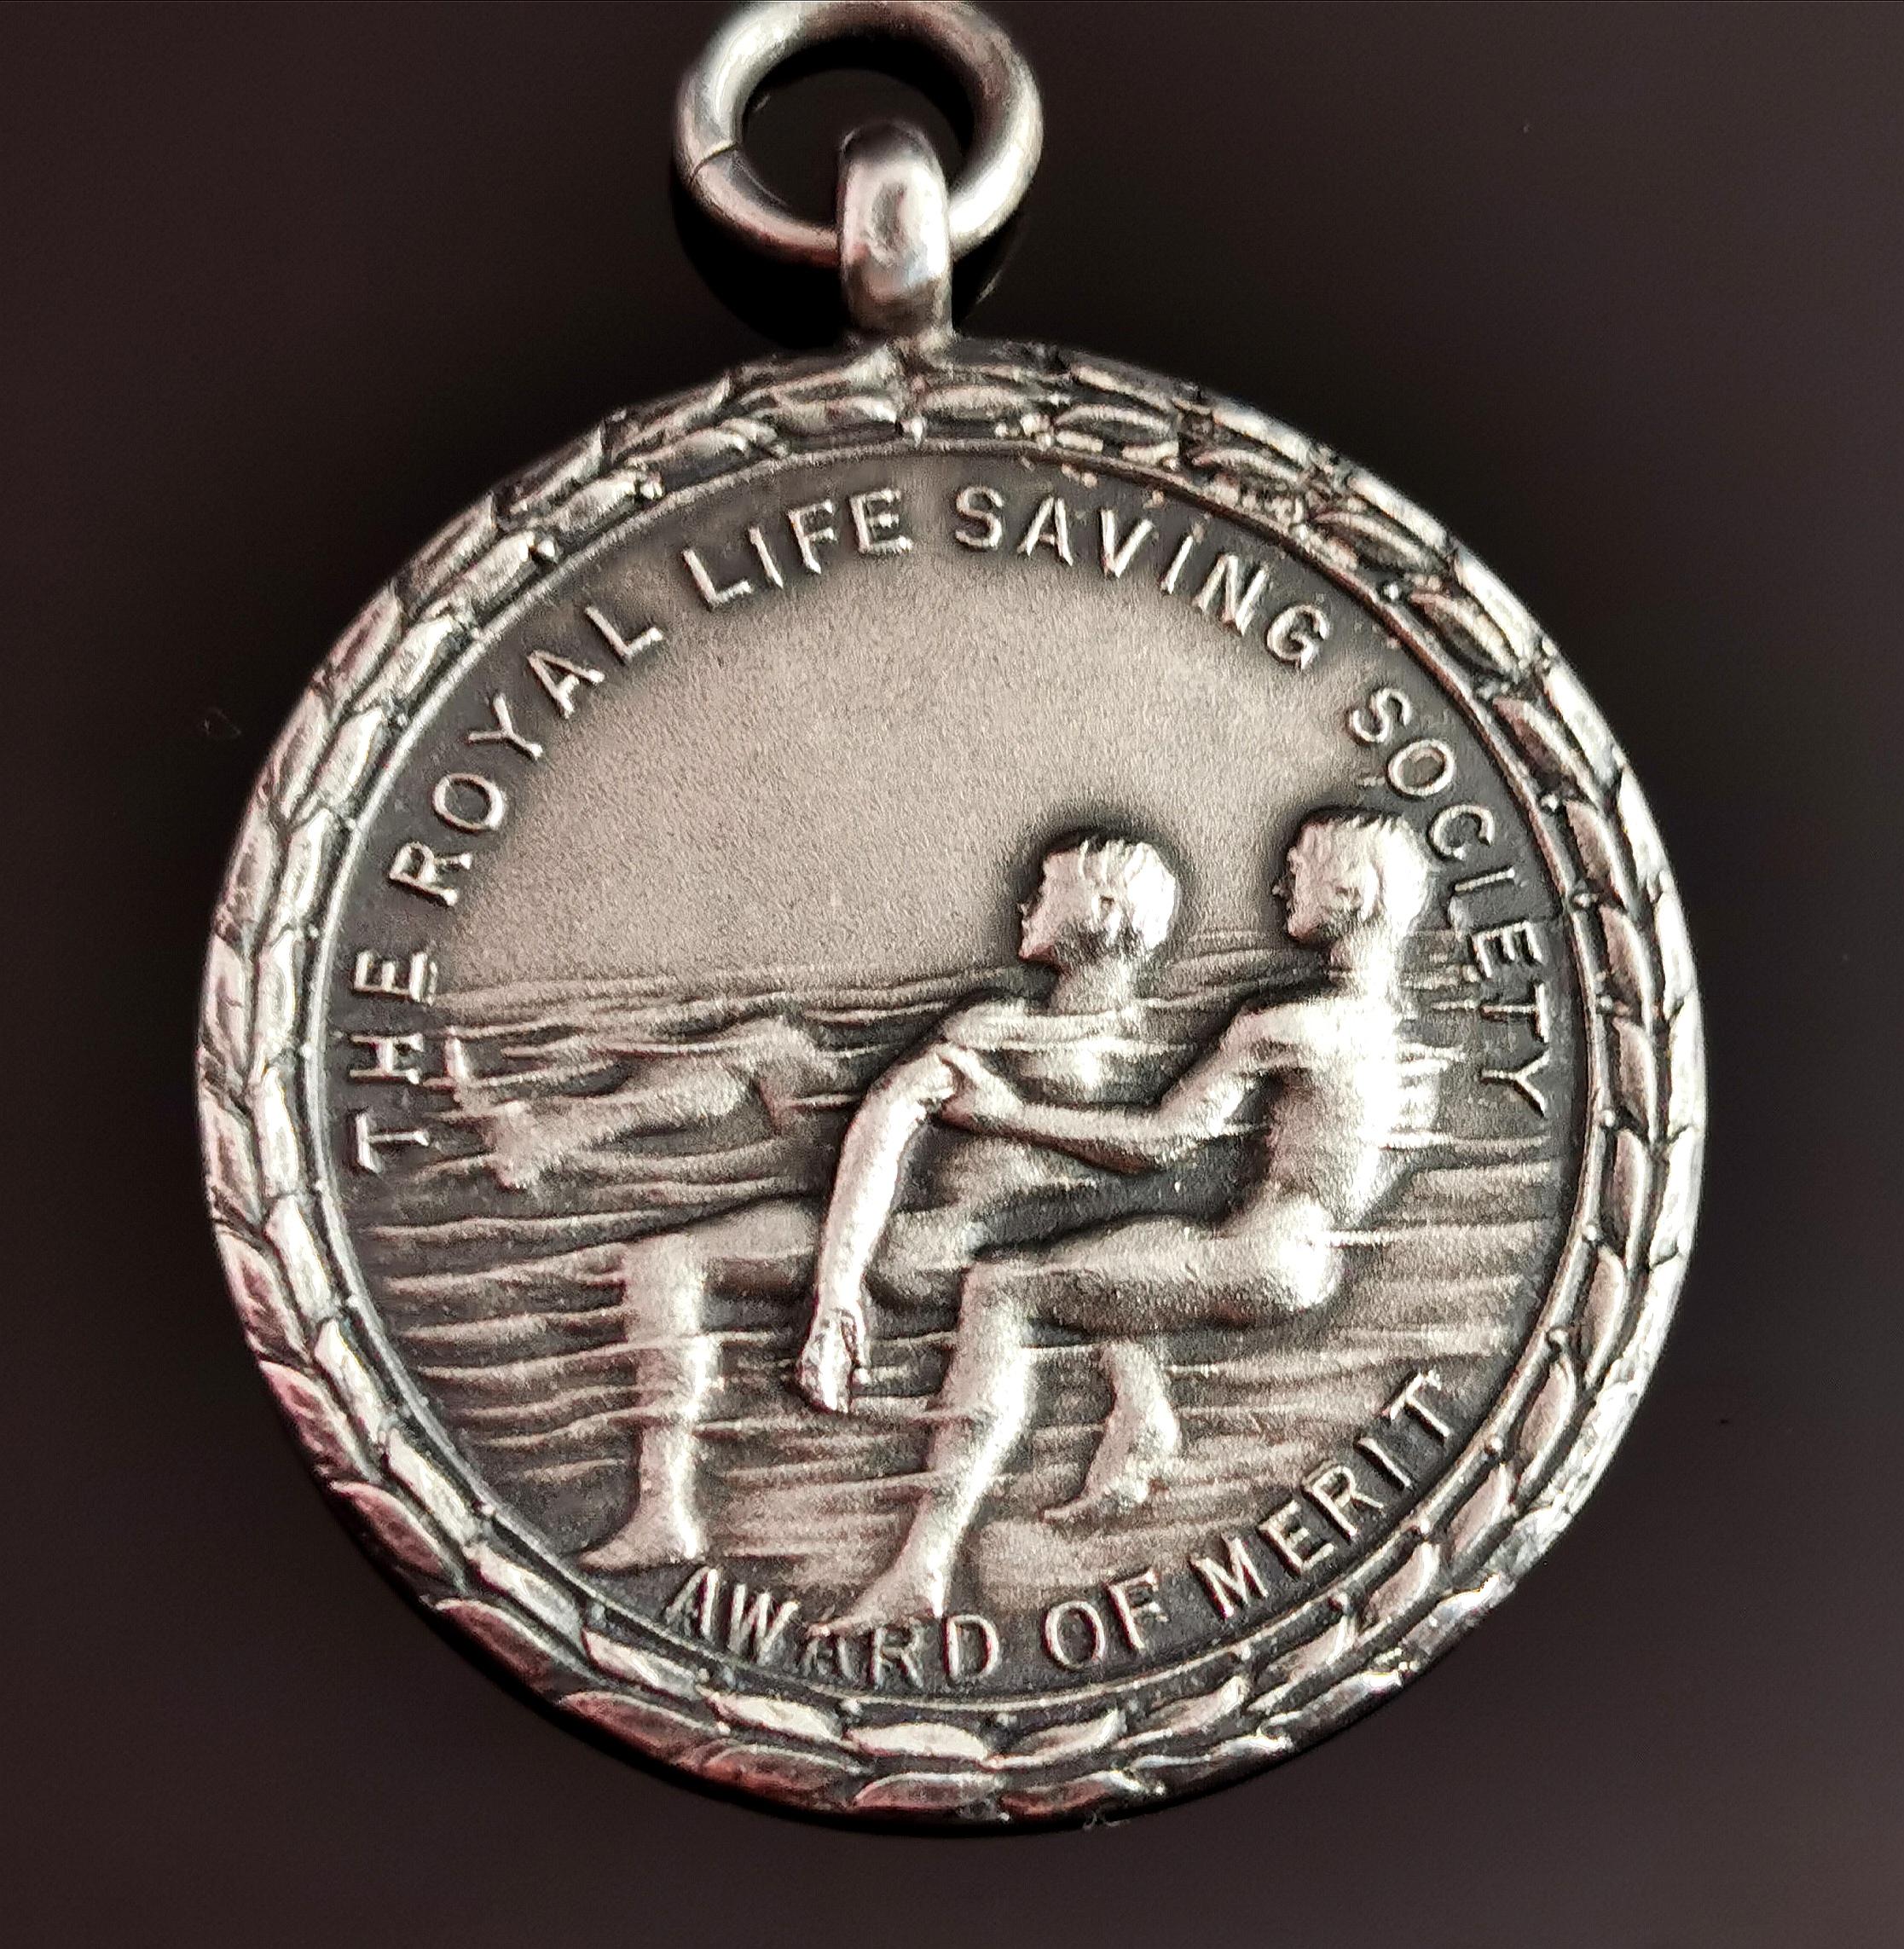 Vintage Sterling Silver Watch Fob Pendant, Lifesaving, 1930s 6